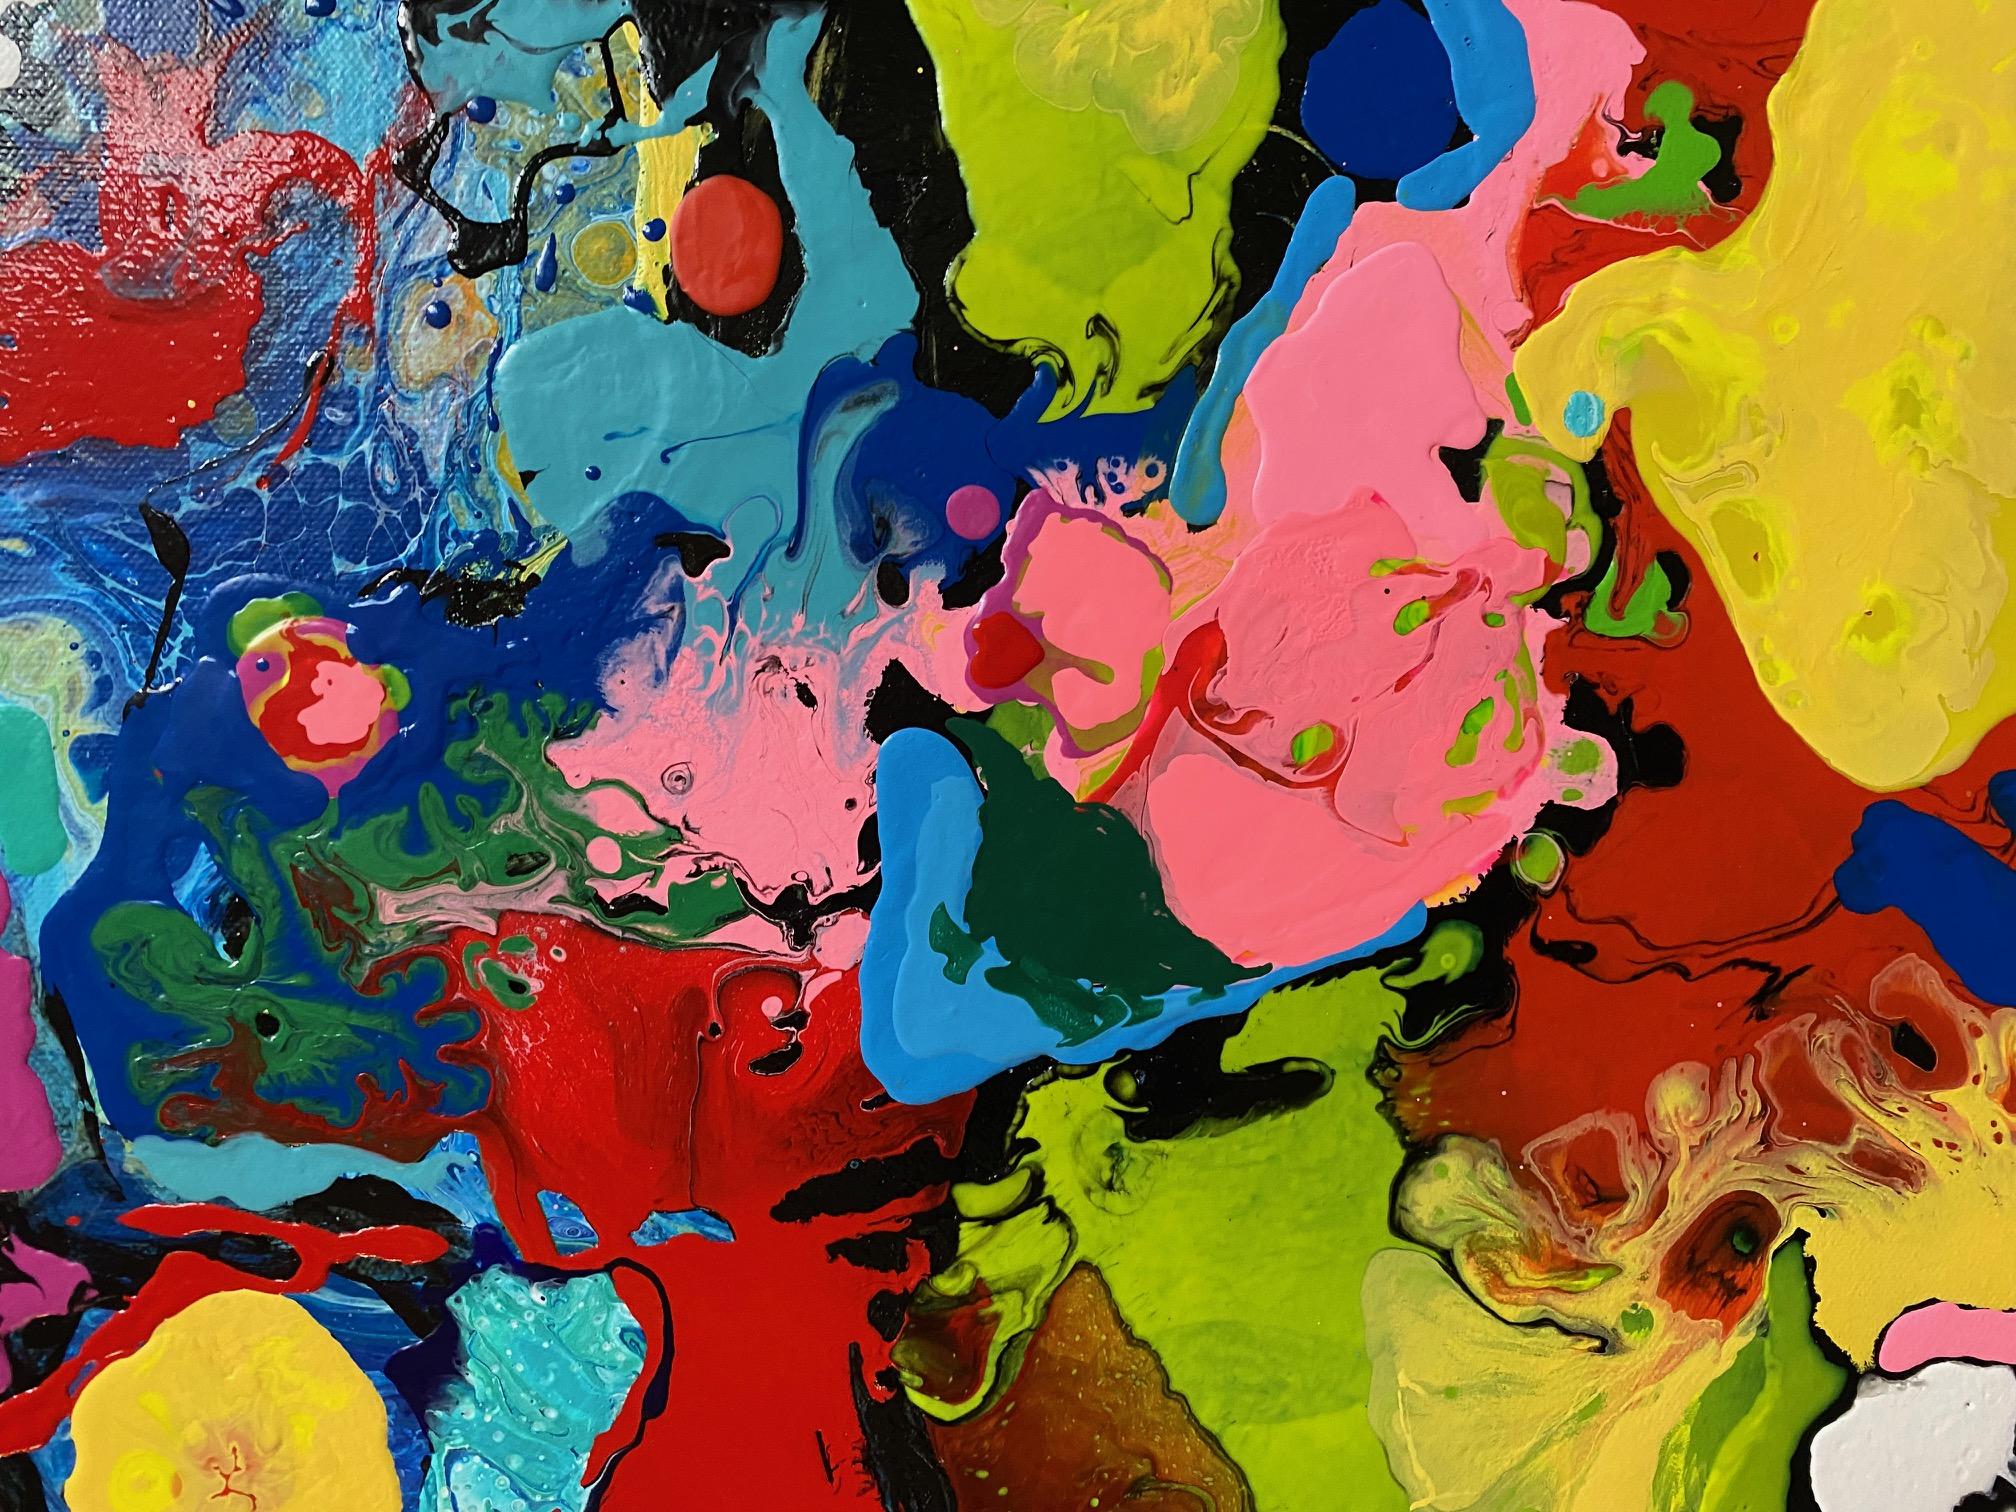 The lush, joyous florals seem to float surrounded by supernatural beauty.  Factor in the representational underpinning and abstract expressionist texture, colors and imagery and you find a simply delightful composition. The longer one lingers on